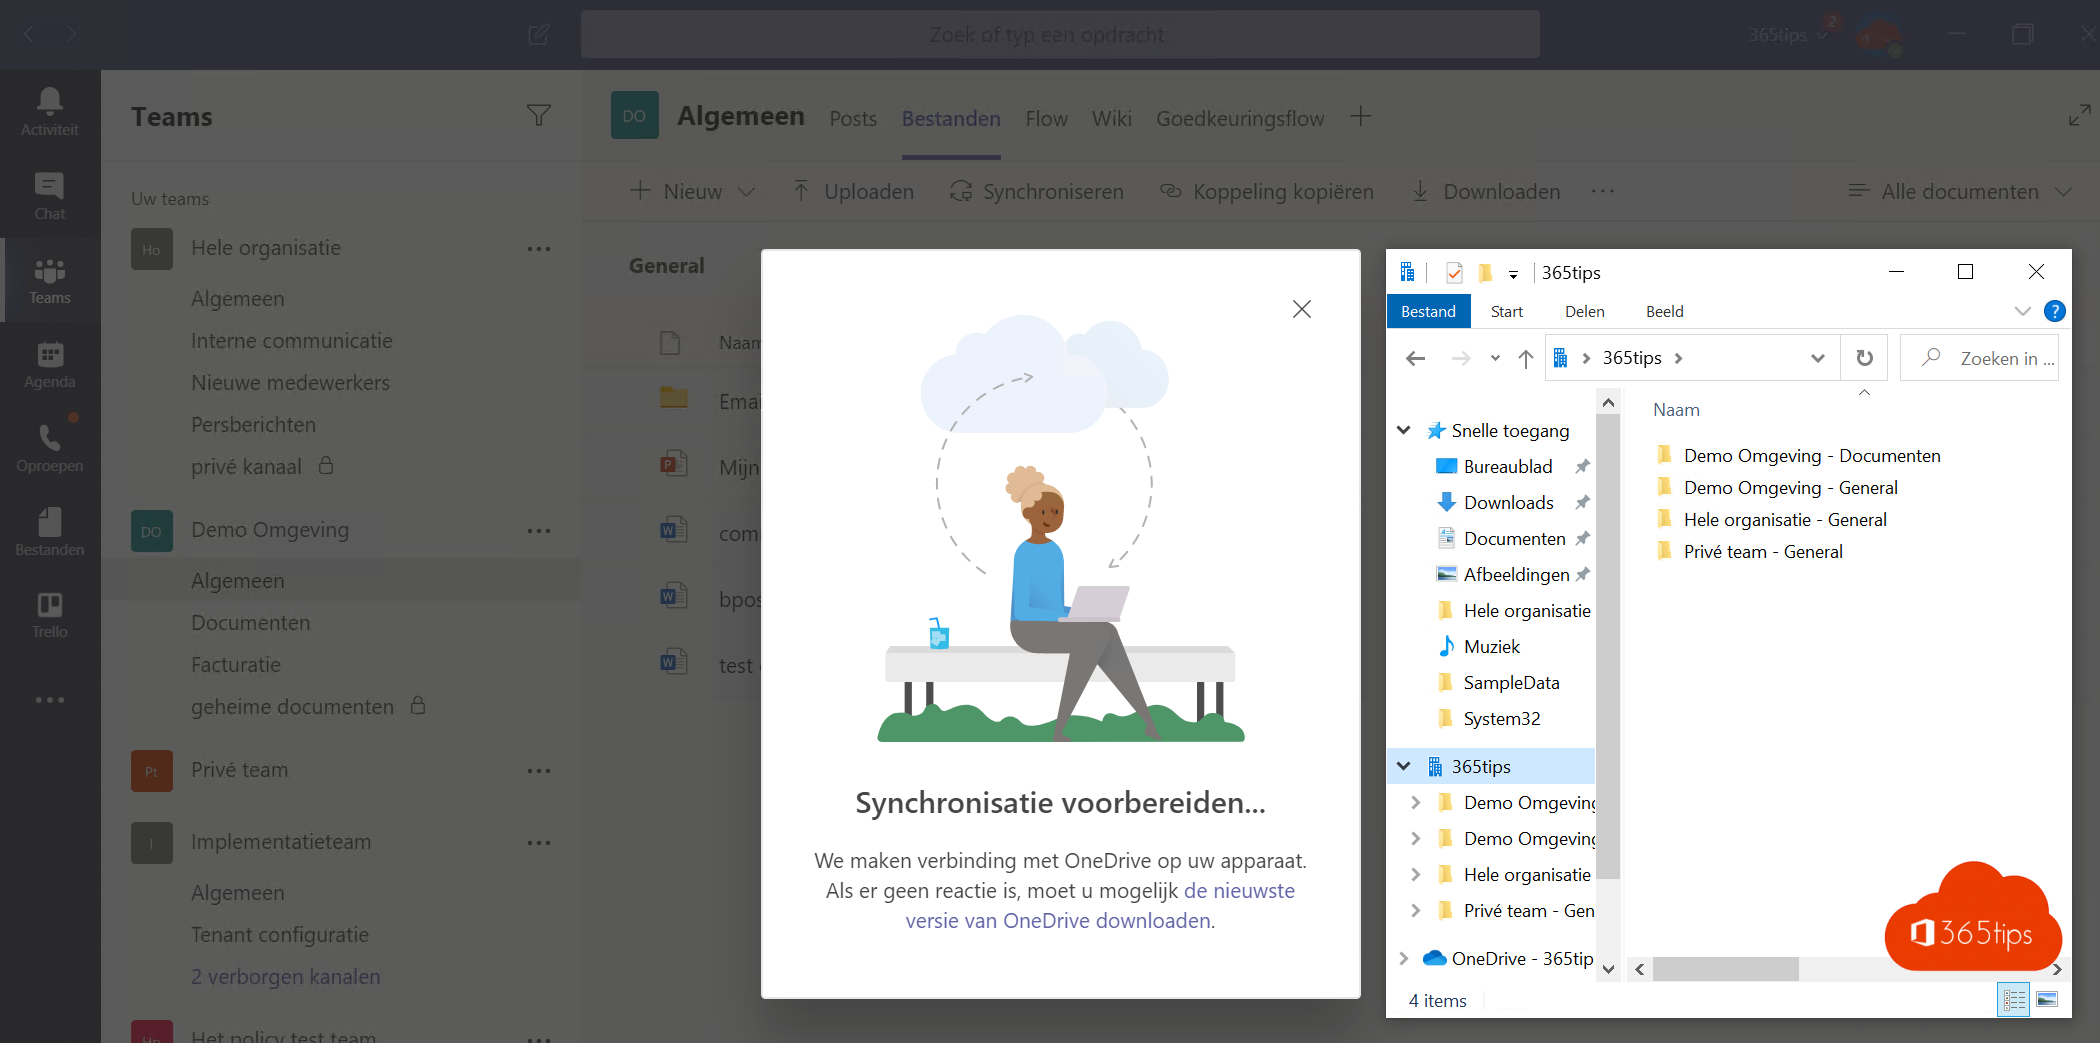 🖥️ How to sync Microsoft teams files with windows explorer?